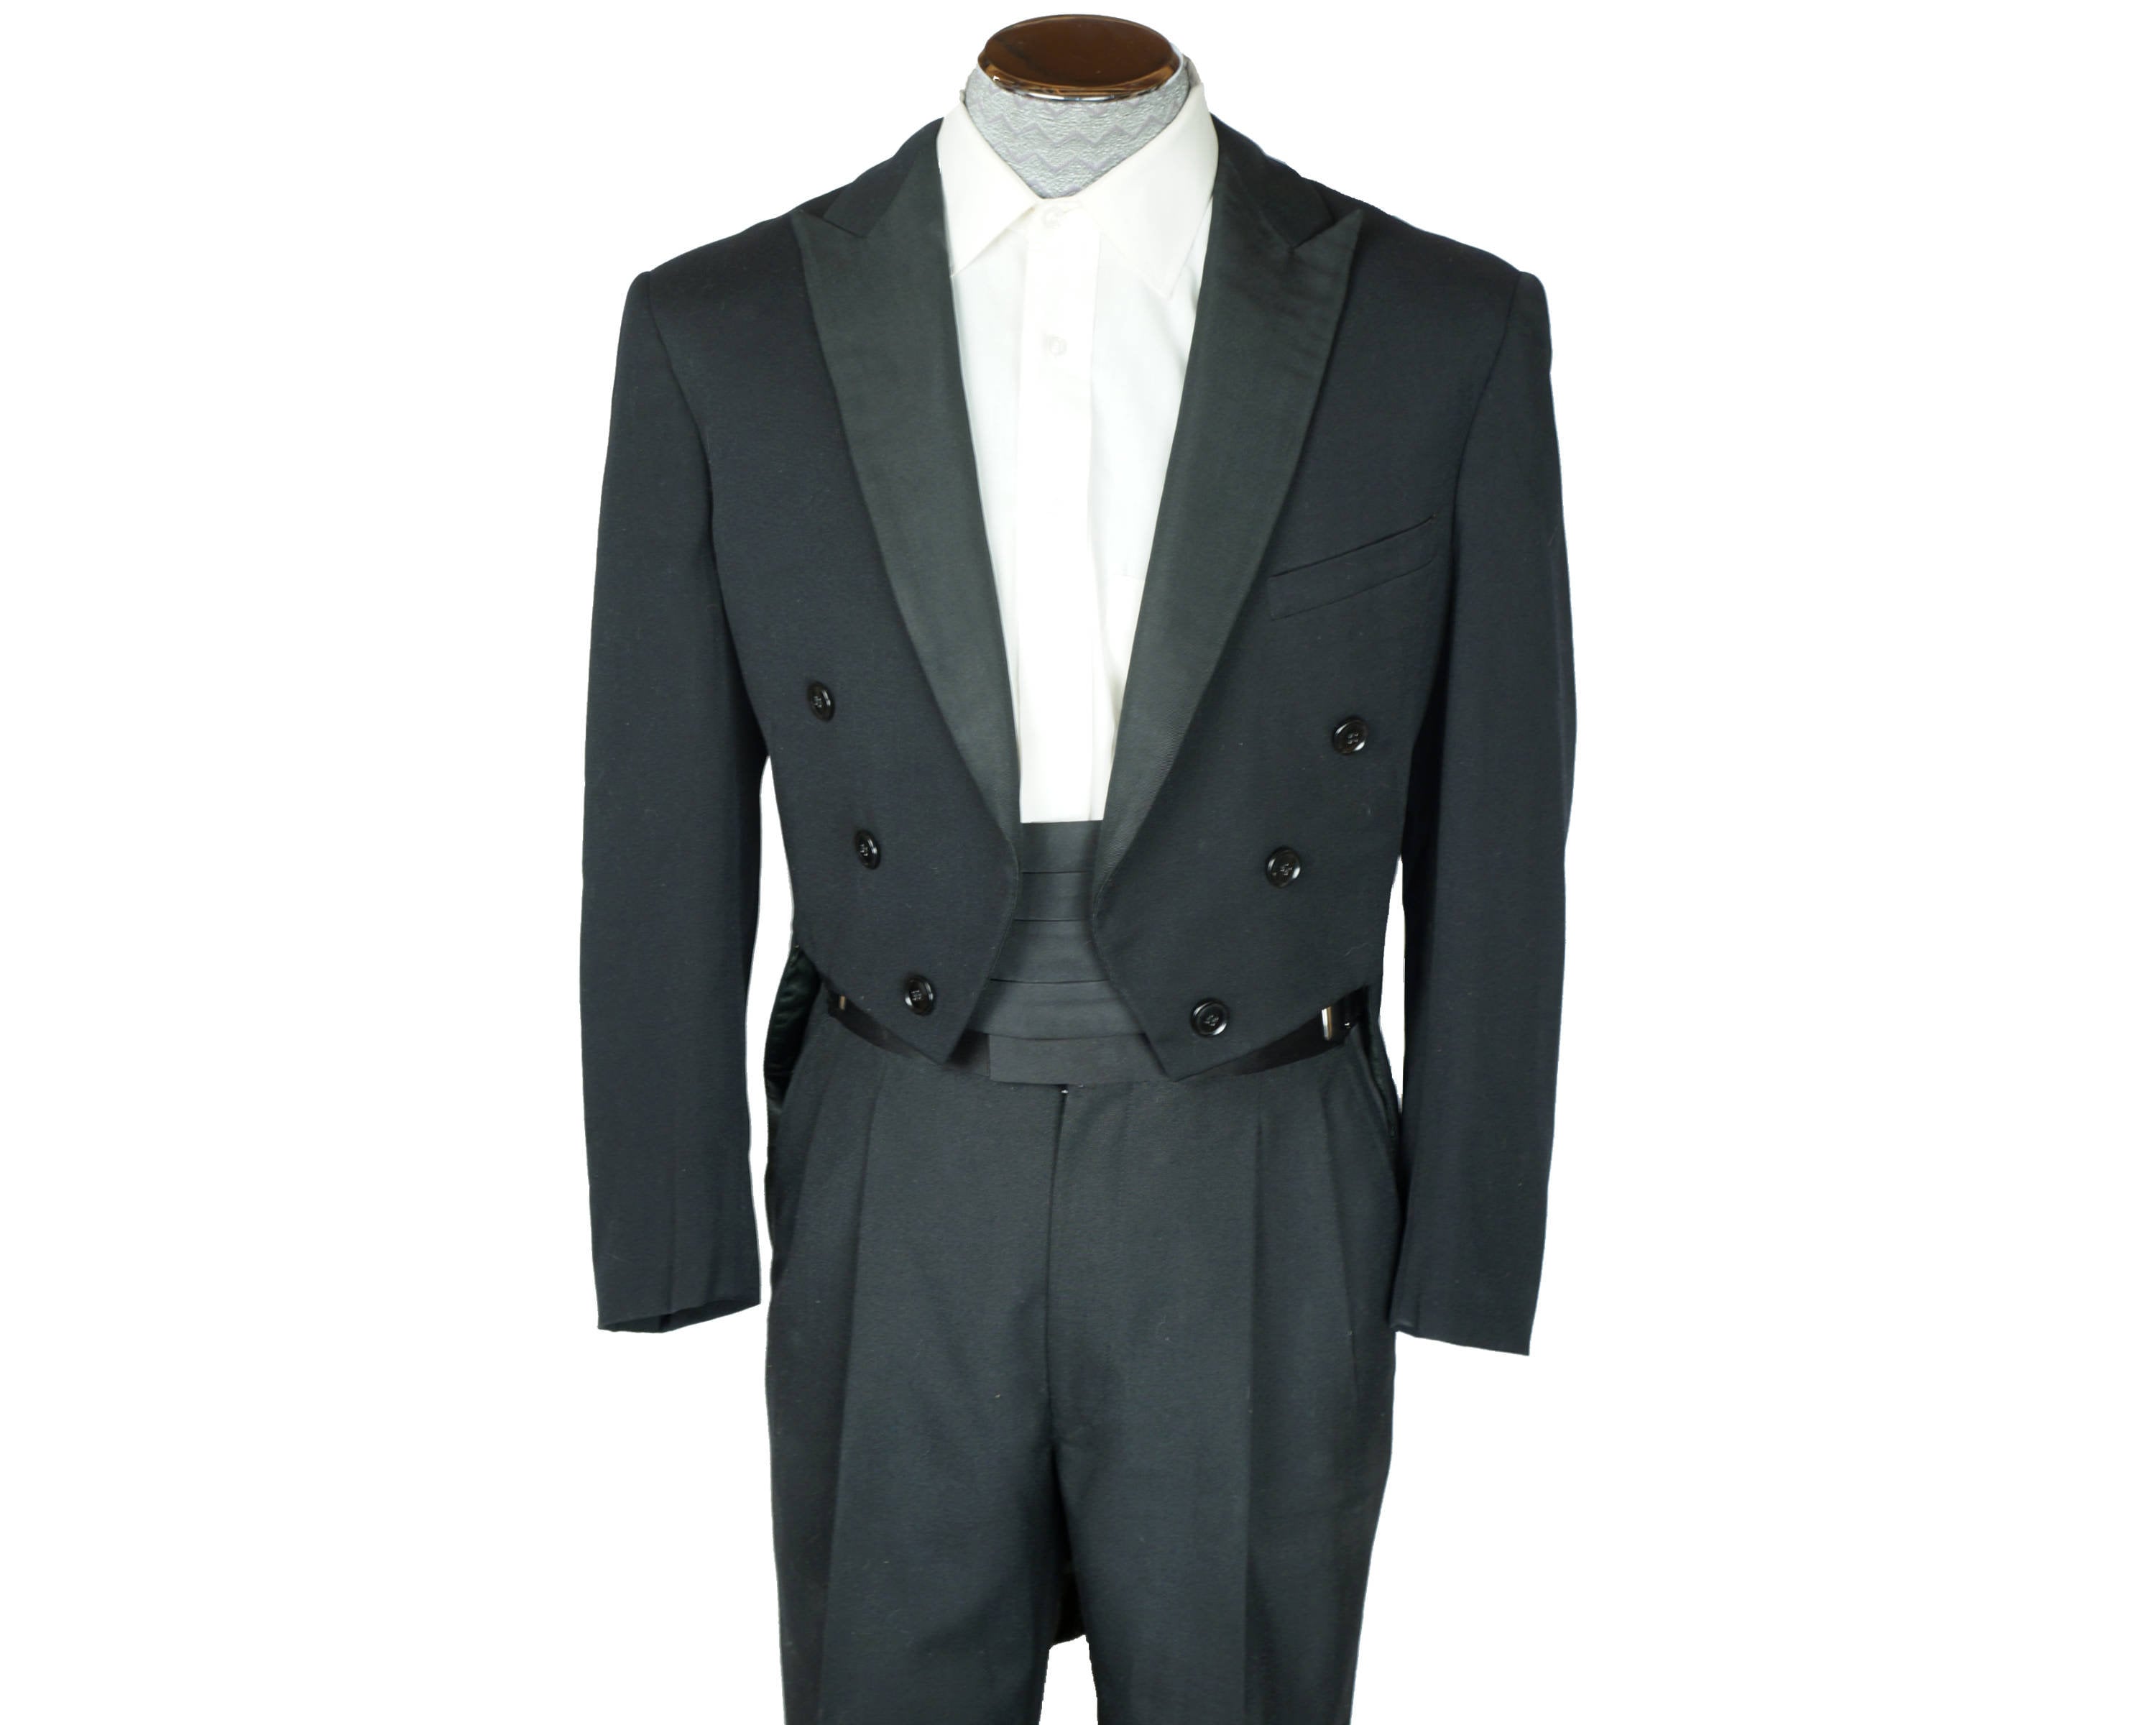 Tuxedo Jacket Tails for sale | Only 3 left at -75%